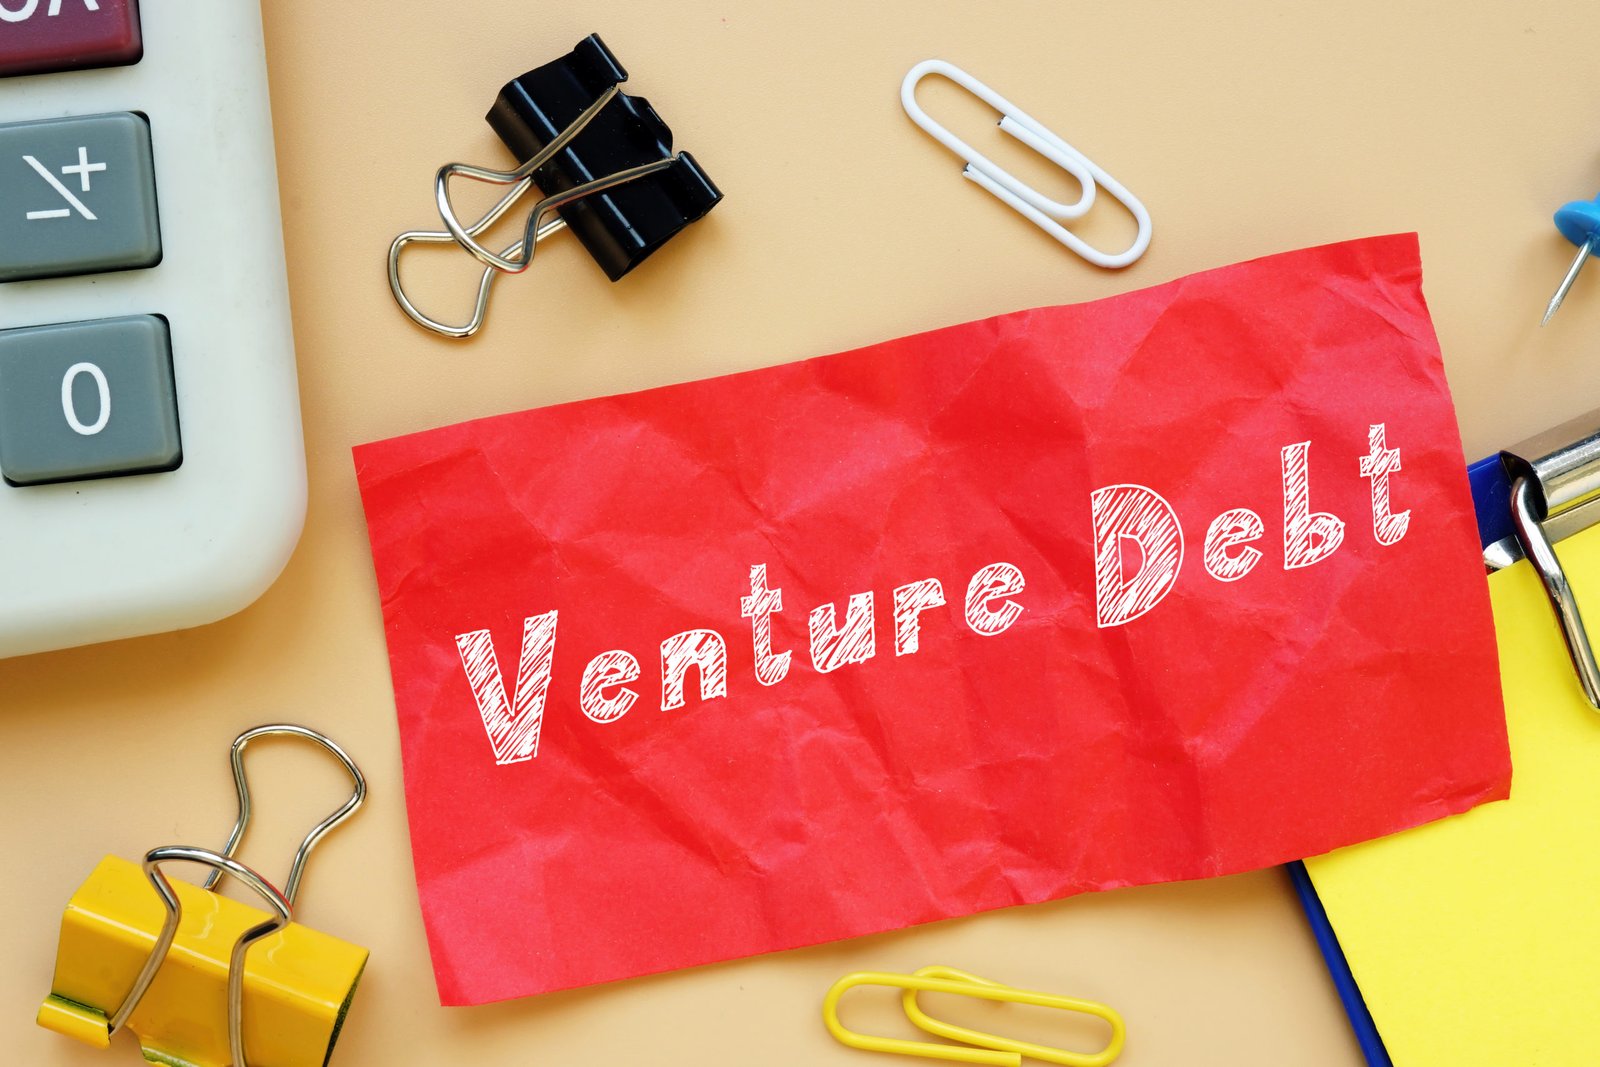 The Advantages and Disadvantages Of Taking Venture Debt for Startup Business Owners